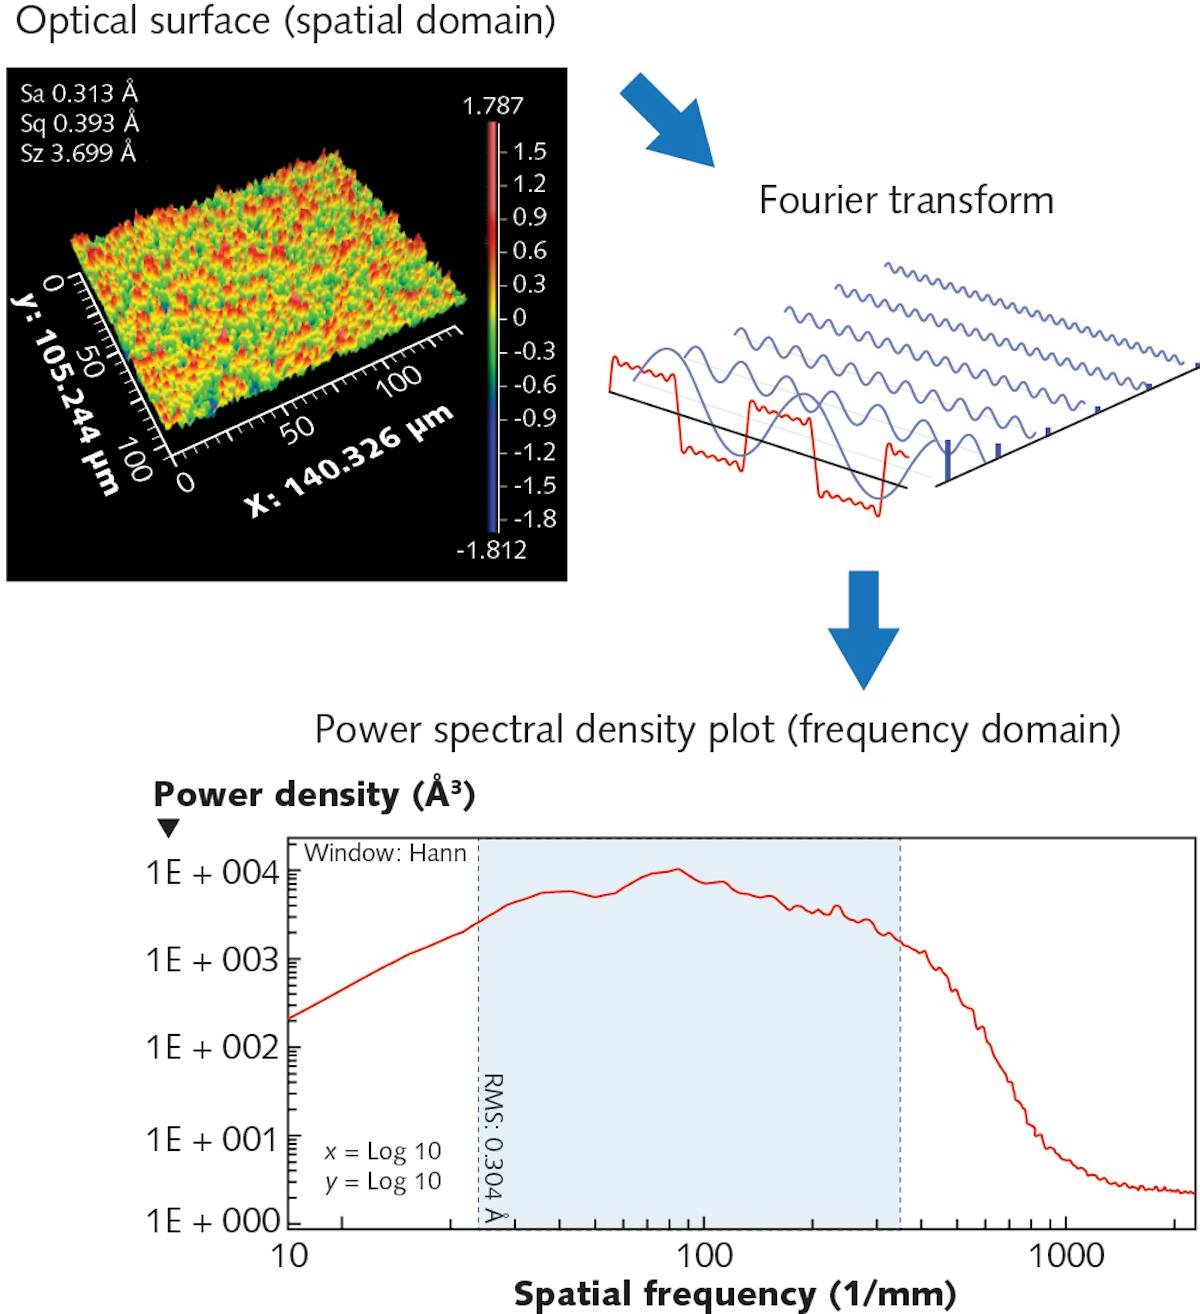 FIGURE 1. The power spectral density (PSD) is created by taking a Fourier transform of the measured surface [1].